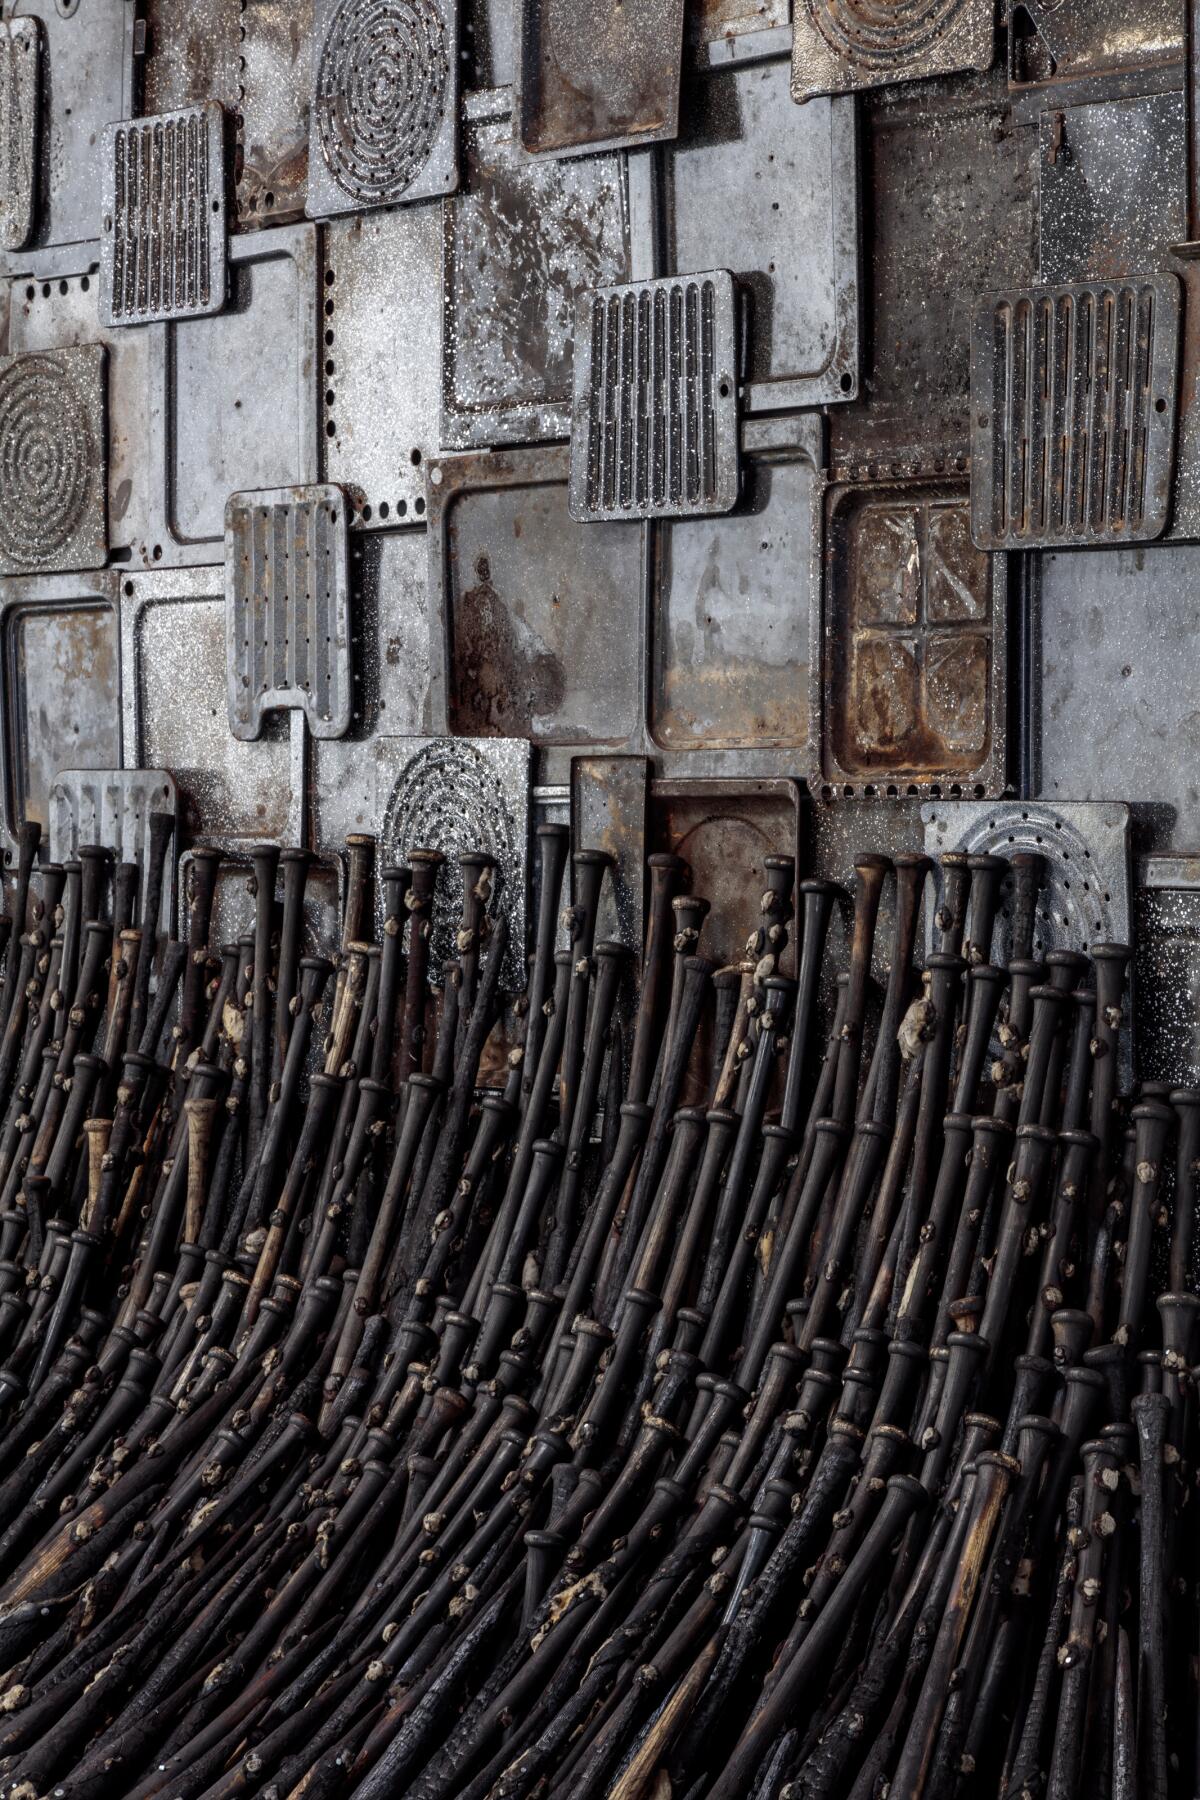 A vertical image shows dozens of burned baseball bats leaning against a wall covered in broiler pans.